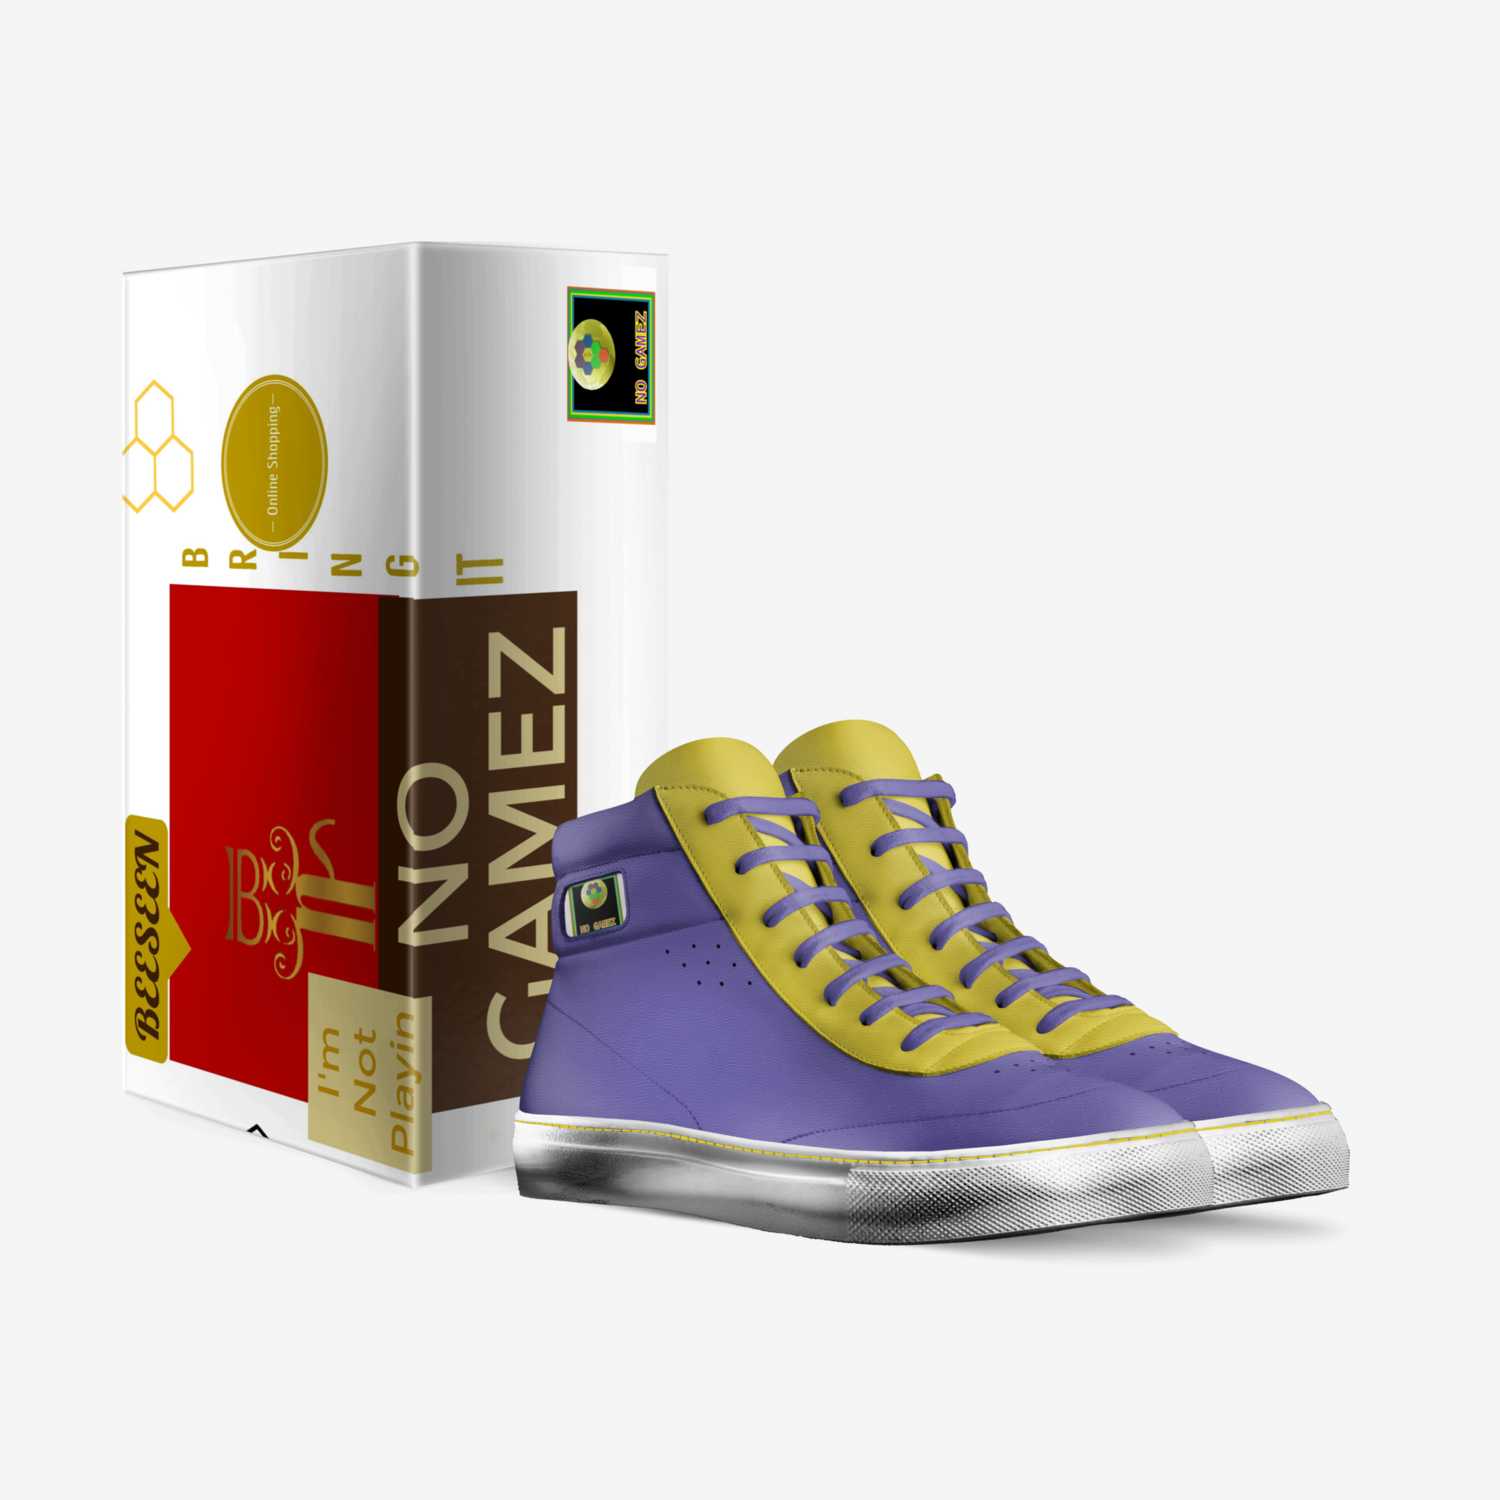 Beeseen NO GAMEZ custom made in Italy shoes by Terran Nalls | Box view